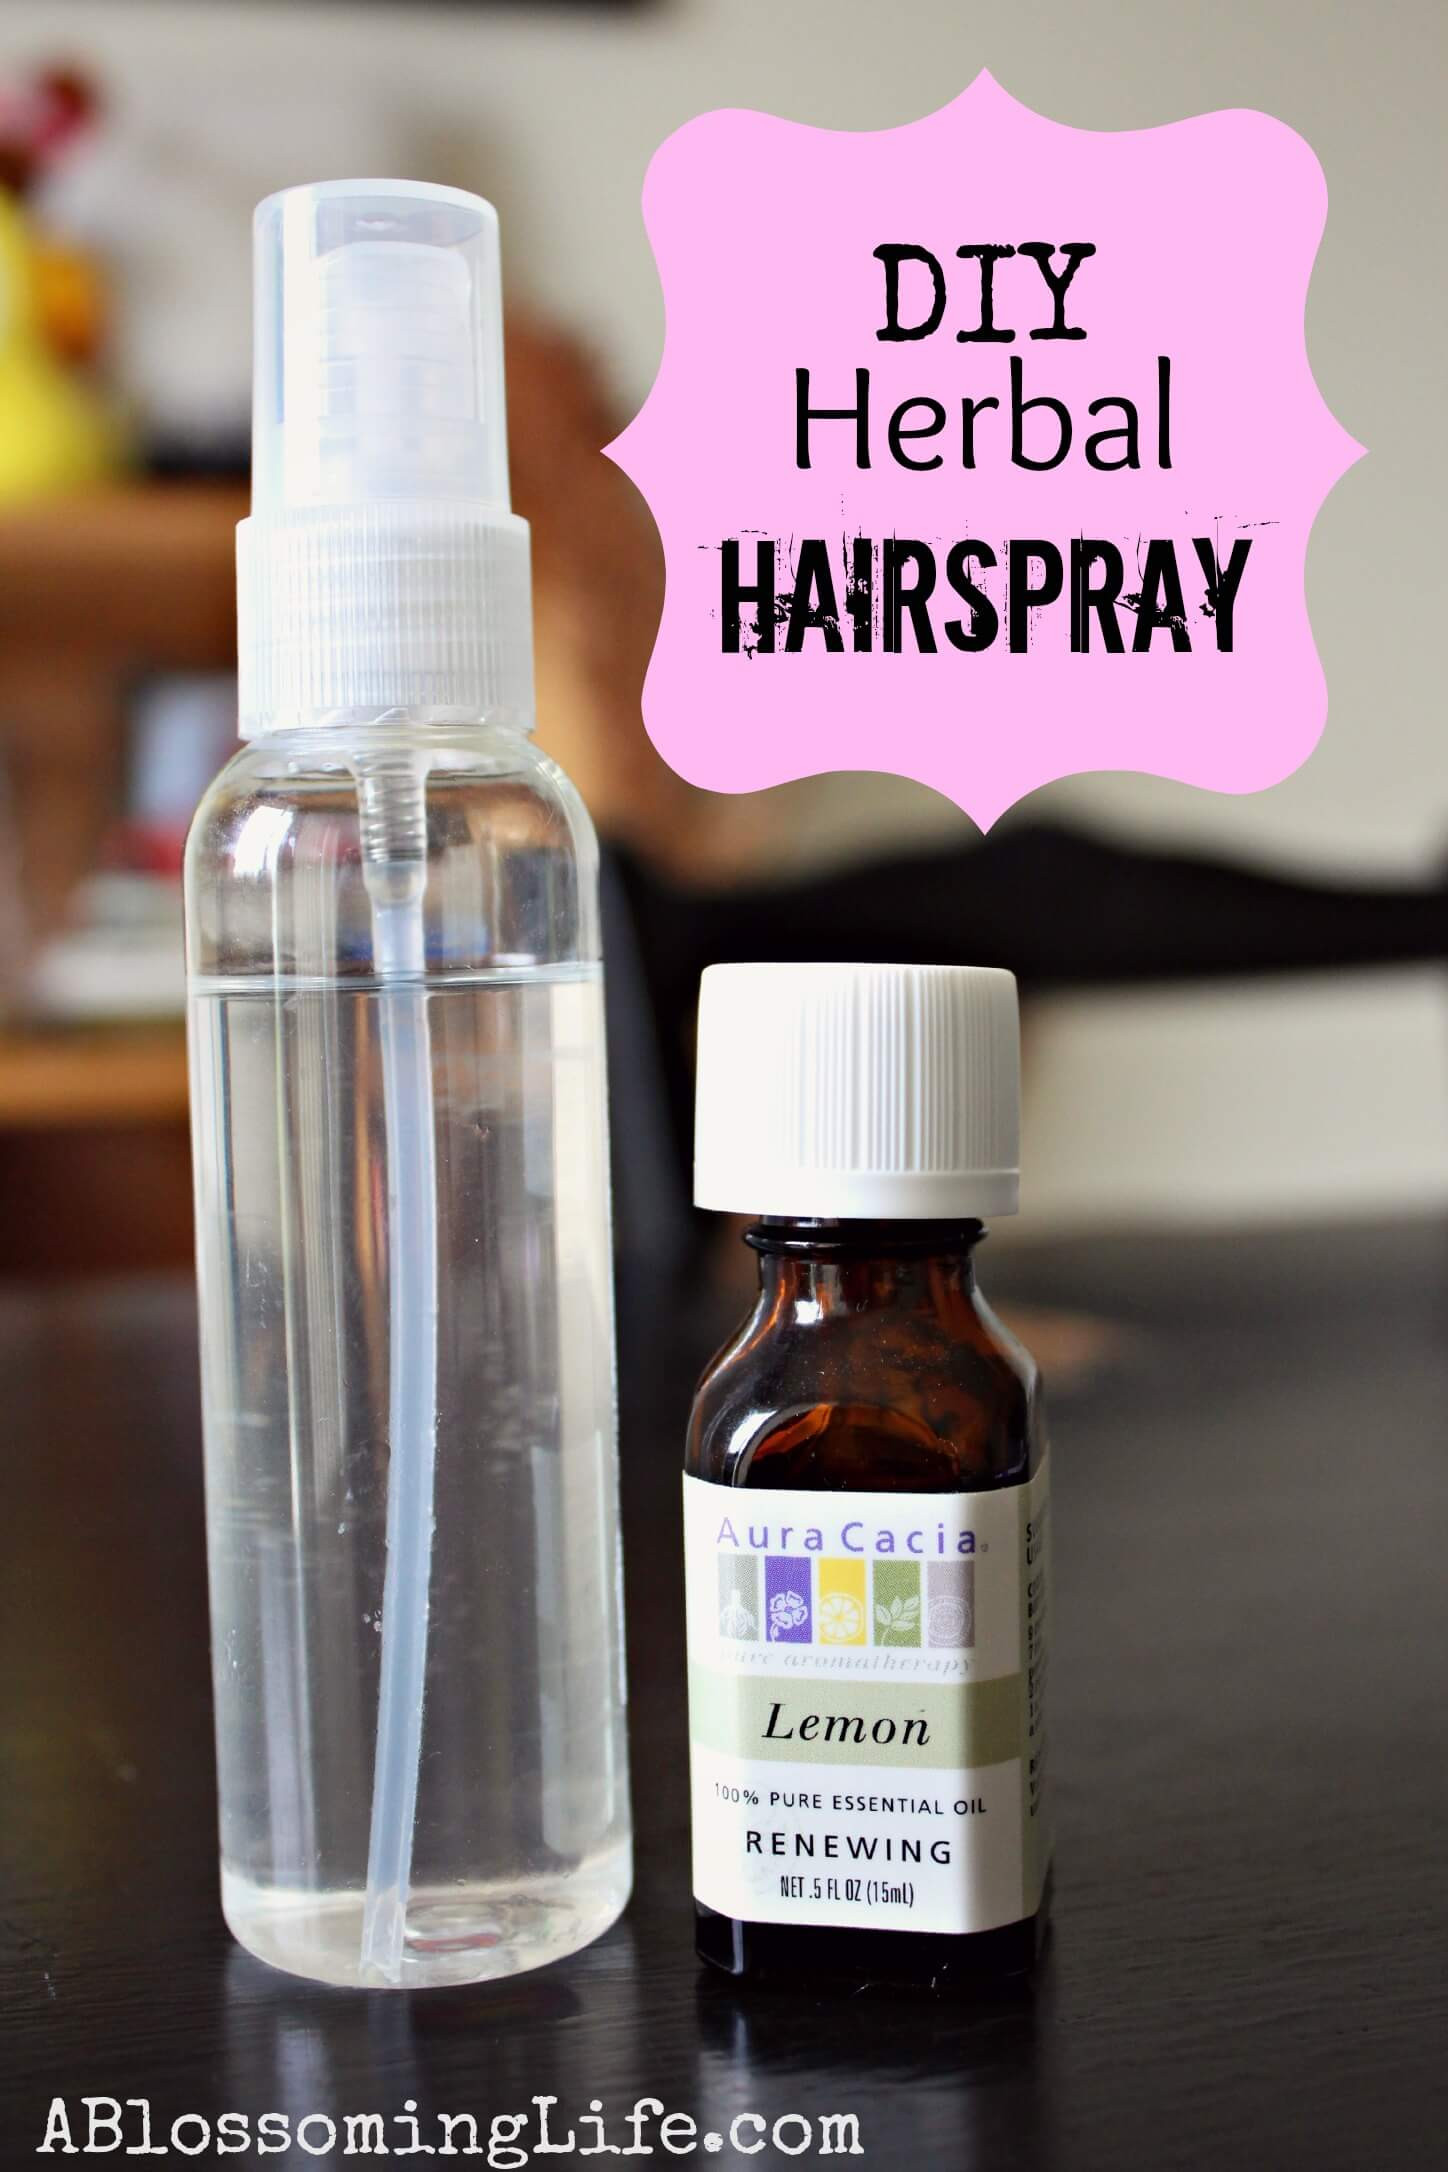 Best ideas about DIY Hair Spray
. Save or Pin Top 11 DIY Homemade Hair Spray recipes Natural and Now.